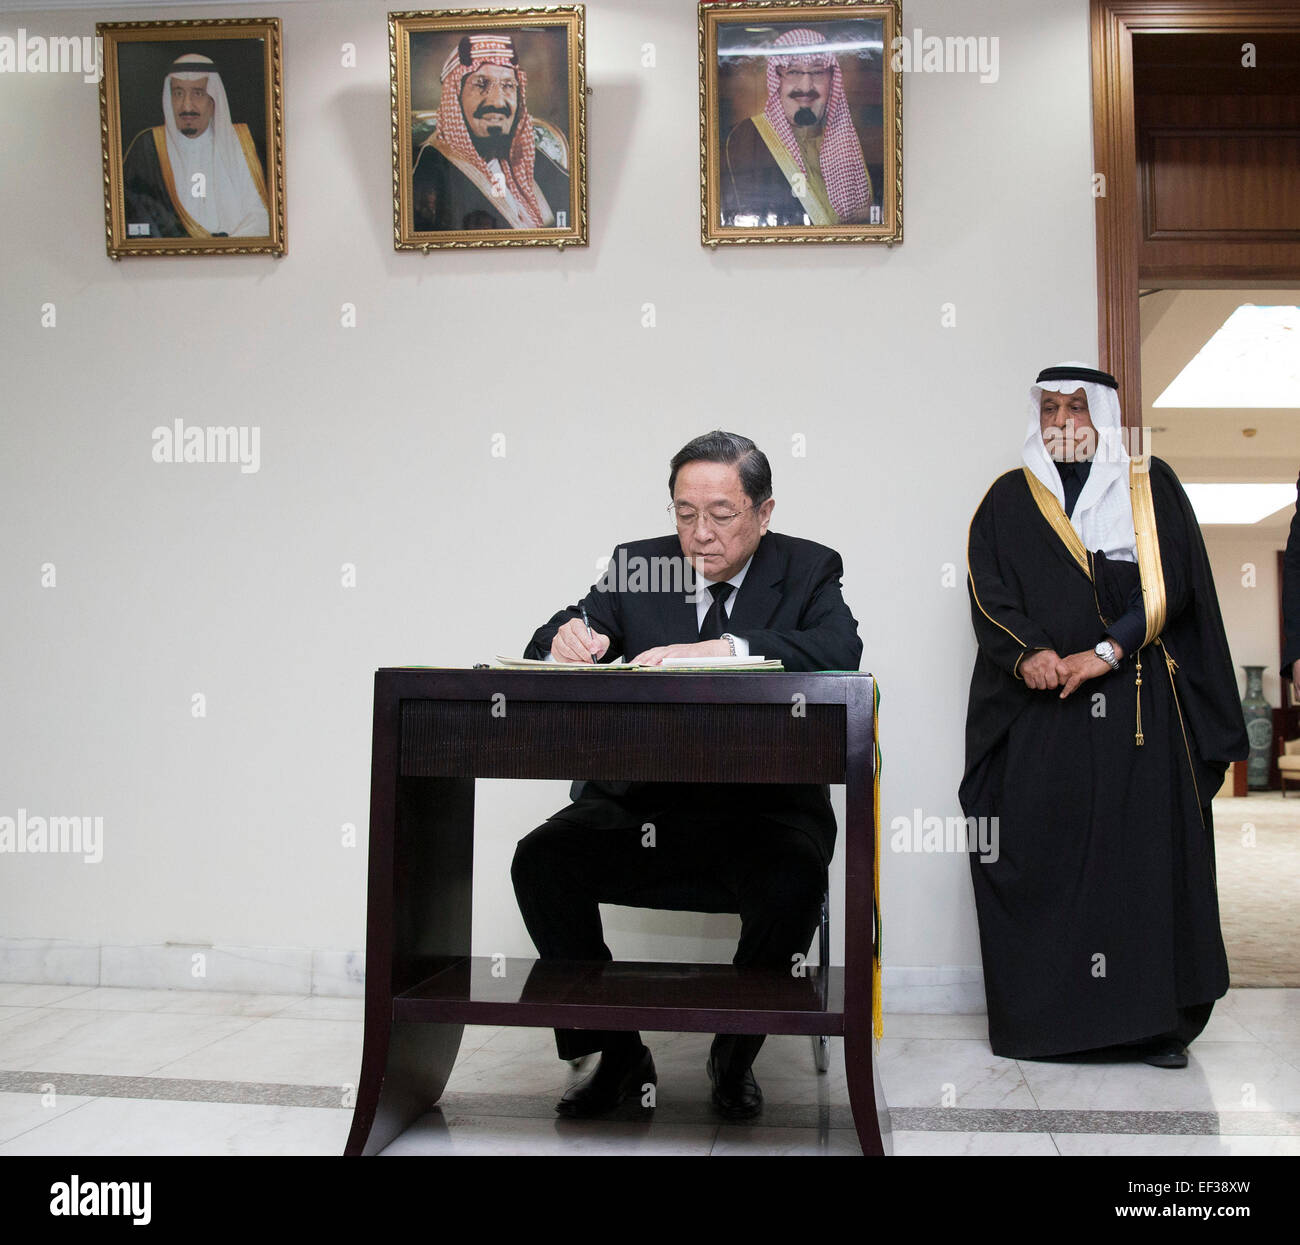 Beijing, China. 26th Jan, 2015. Yu Zhengsheng (L), chairman of the National Committee of the Chinese People's Political Consultative Conference (CPPCC), writes on a condolence book at the embassy of Saudi Arabia in Beijing, capital of China, Jan. 26, 2015. Yu Zhengsheng visited the embassy of Saudi Arabia in Beijing Monday morning to express condolences over the death of King Abdullah bin Abdulaziz. © Huang Jingwen/Xinhua/Alamy Live News Stock Photo